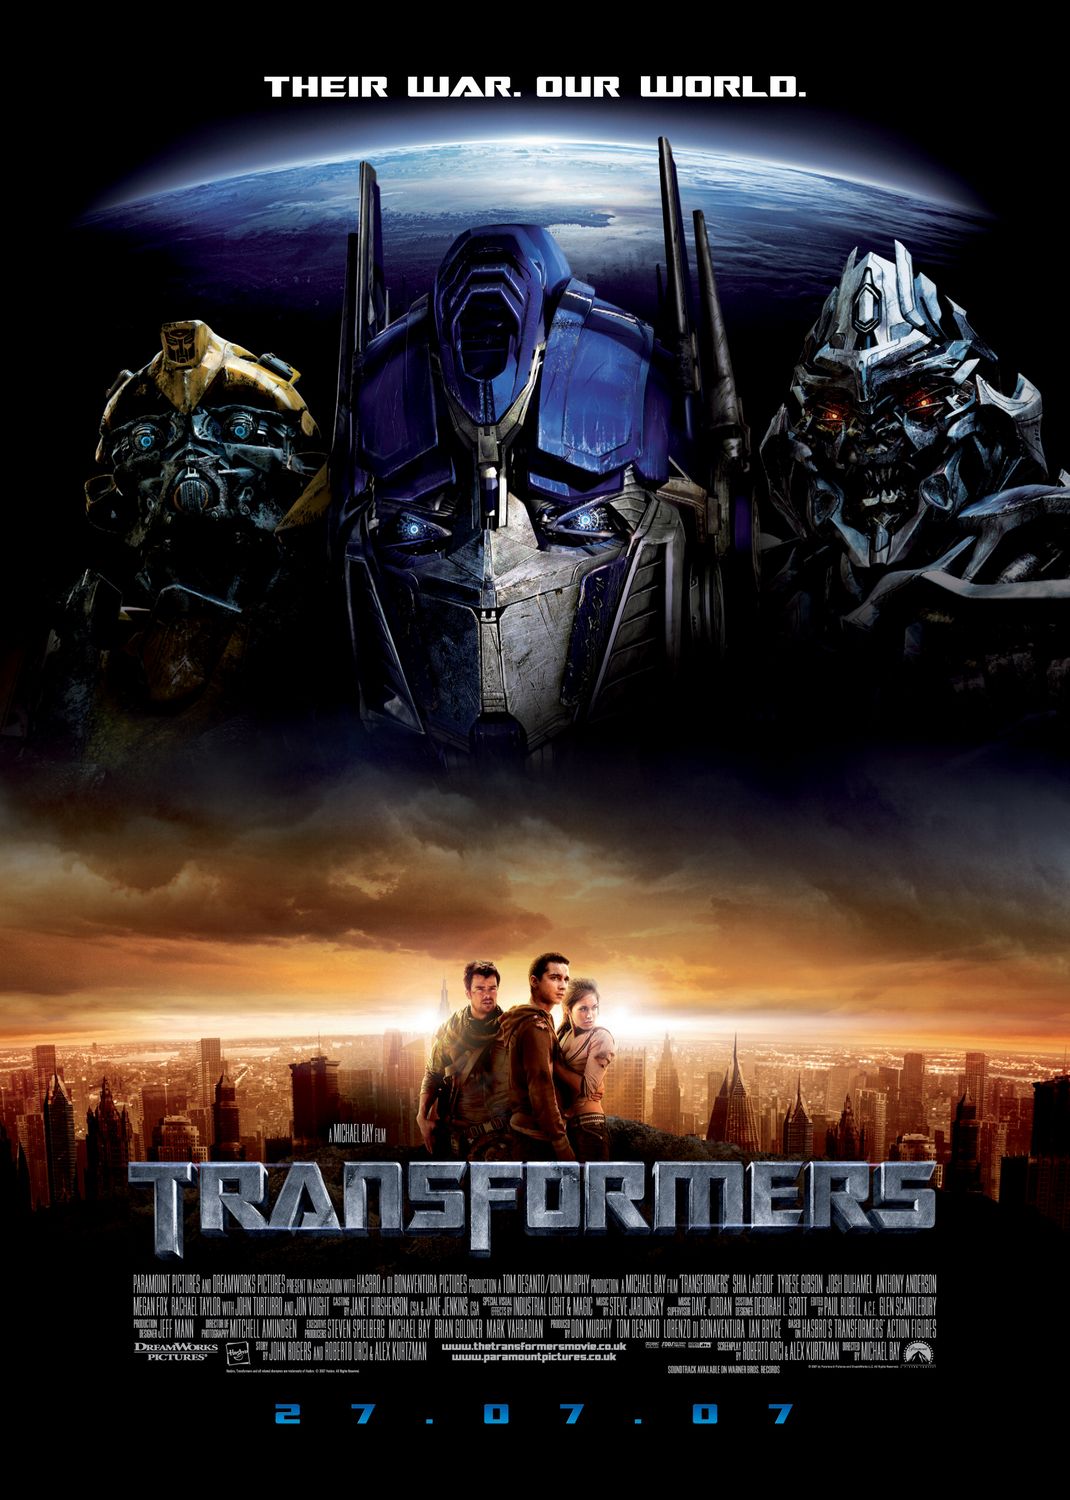 Transformers Movie (2007) Cast, Watch Online, Story, Budget, Collection, Release Date, Poster, Trailer, Review